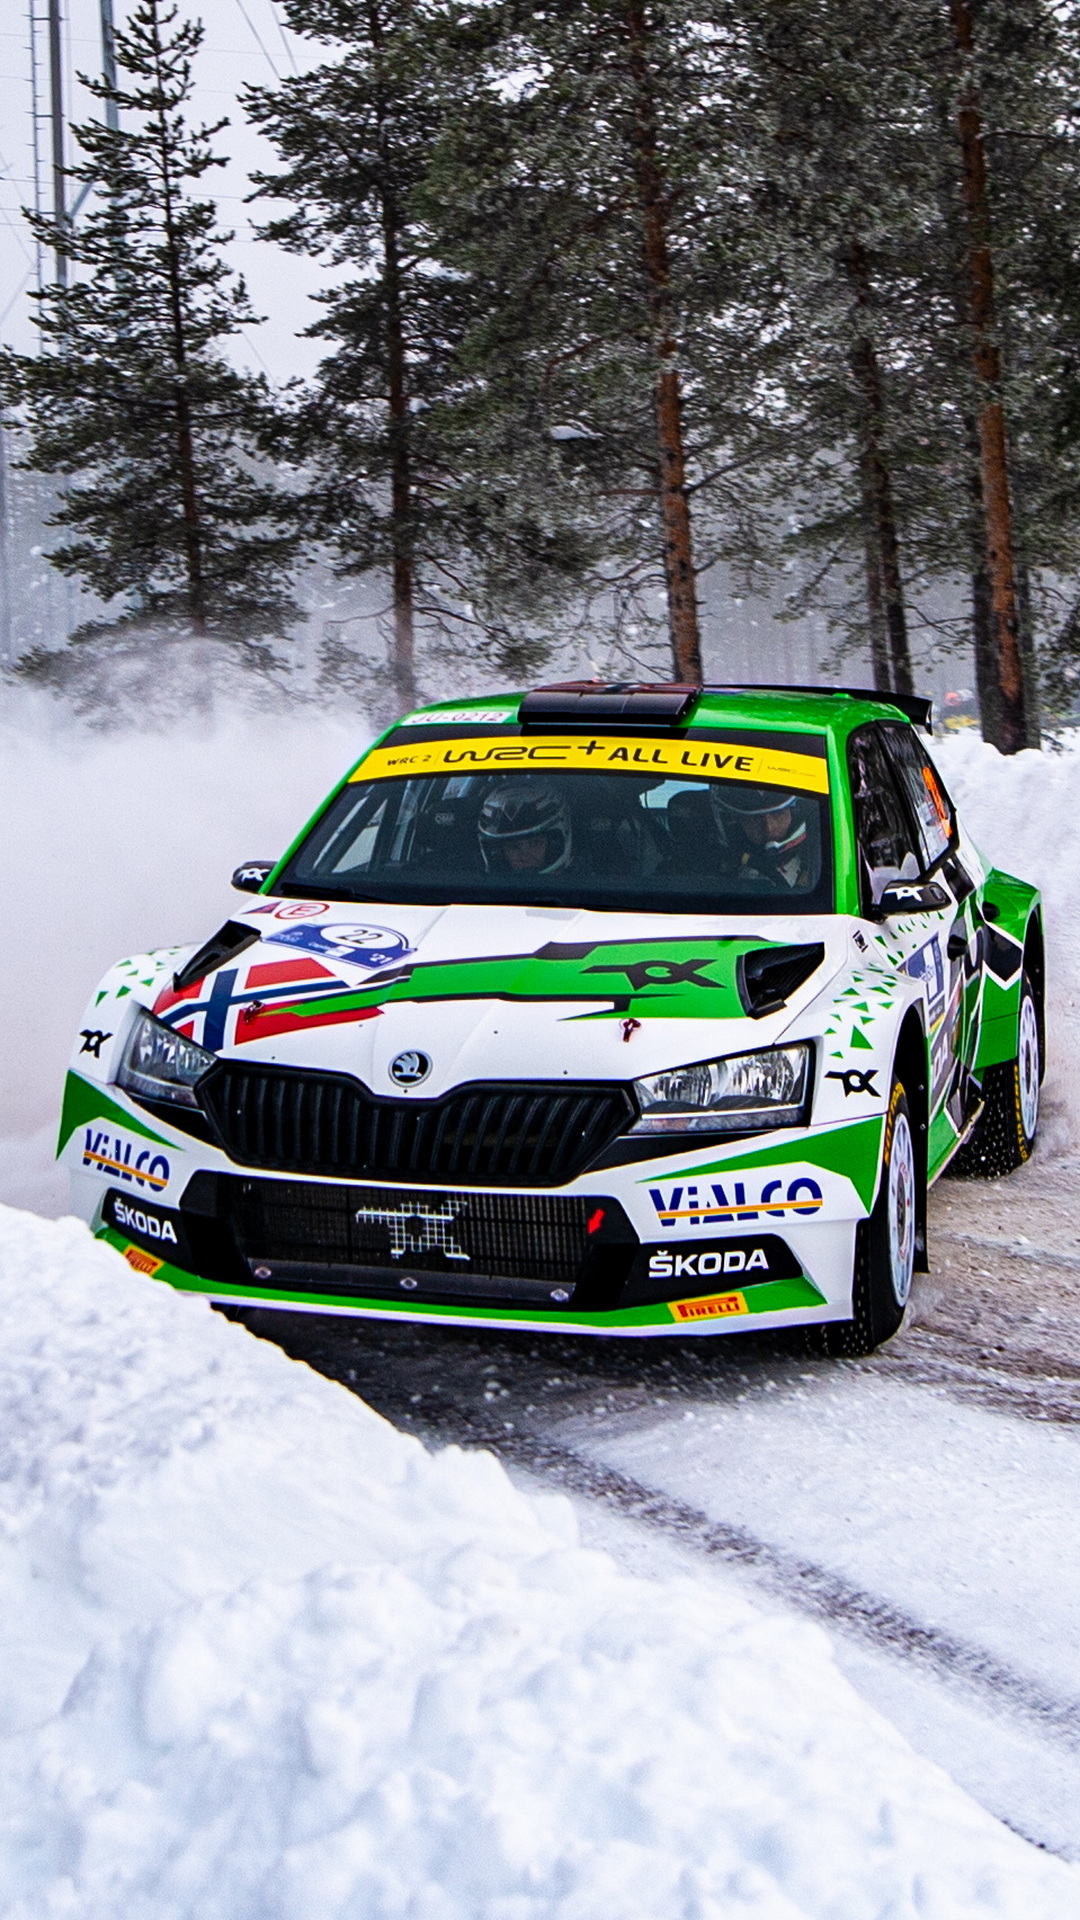 Free download download arctic rally finland wallpapers for your phone koda x for your desktop mobile tablet explore skoda fabia wallpapers skoda octavia wallpapers skoda scala wallpapers